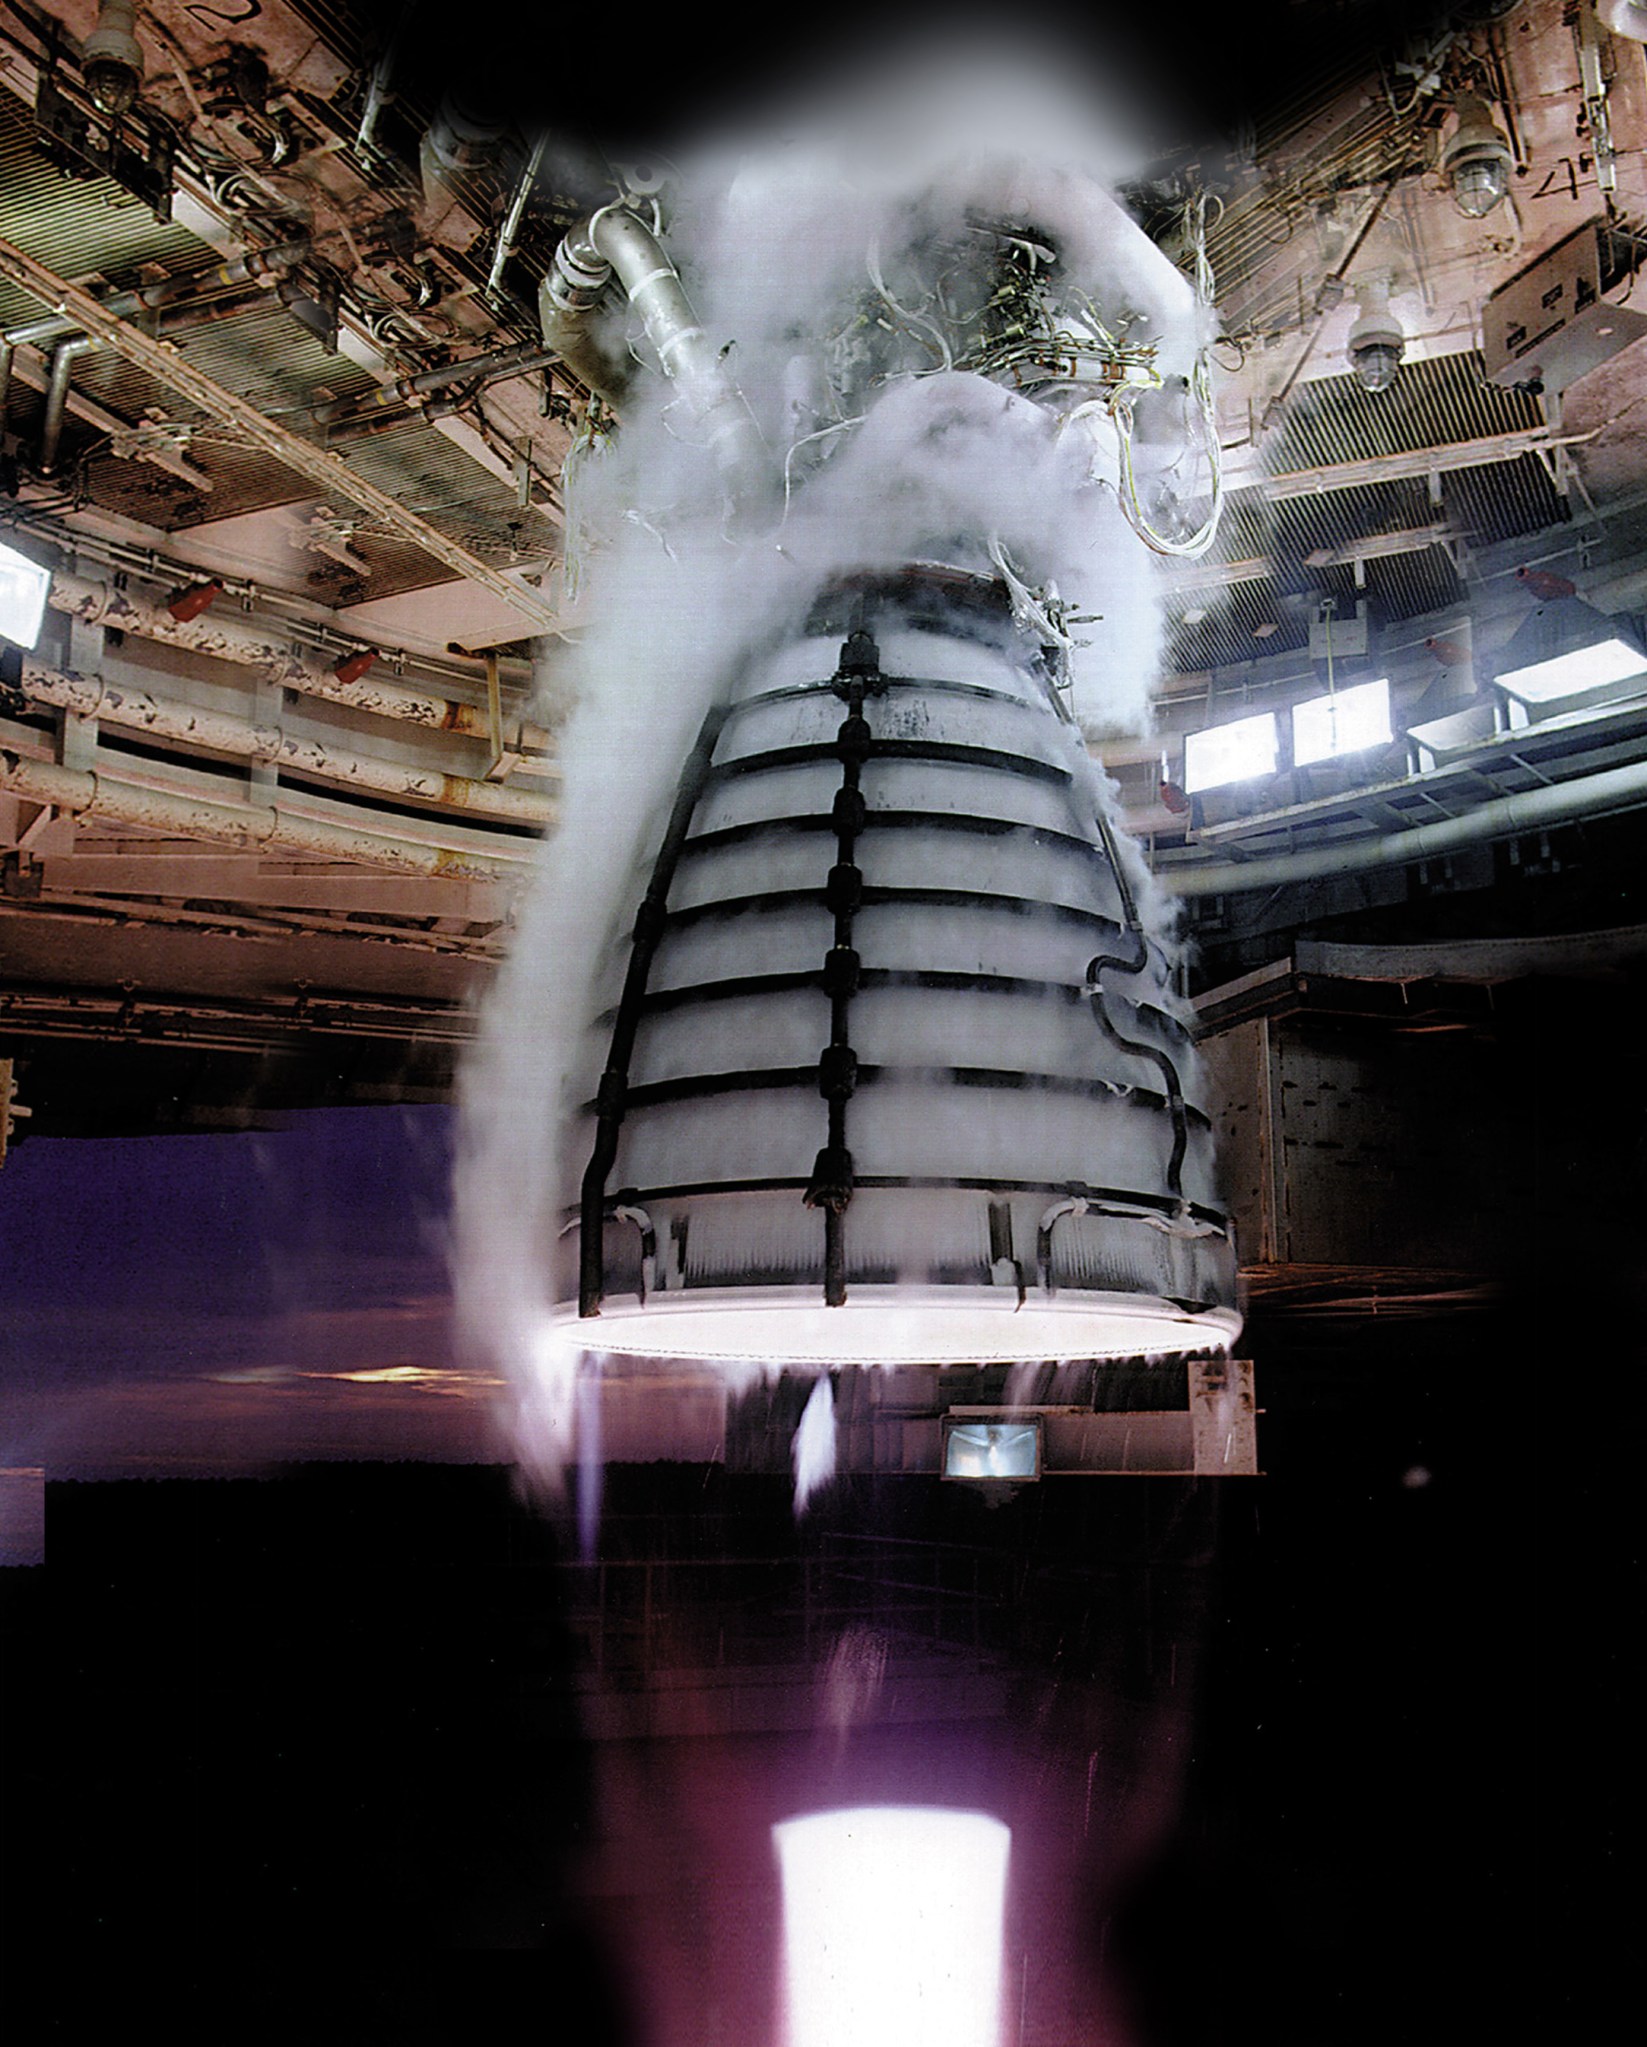 Formerly known as the space shuttle main engine, the RS-25 accumulated over 1 million seconds—or almost 280 hours — of hot fire experience during 135 missions and numerous related engine tests like the one pictured here.